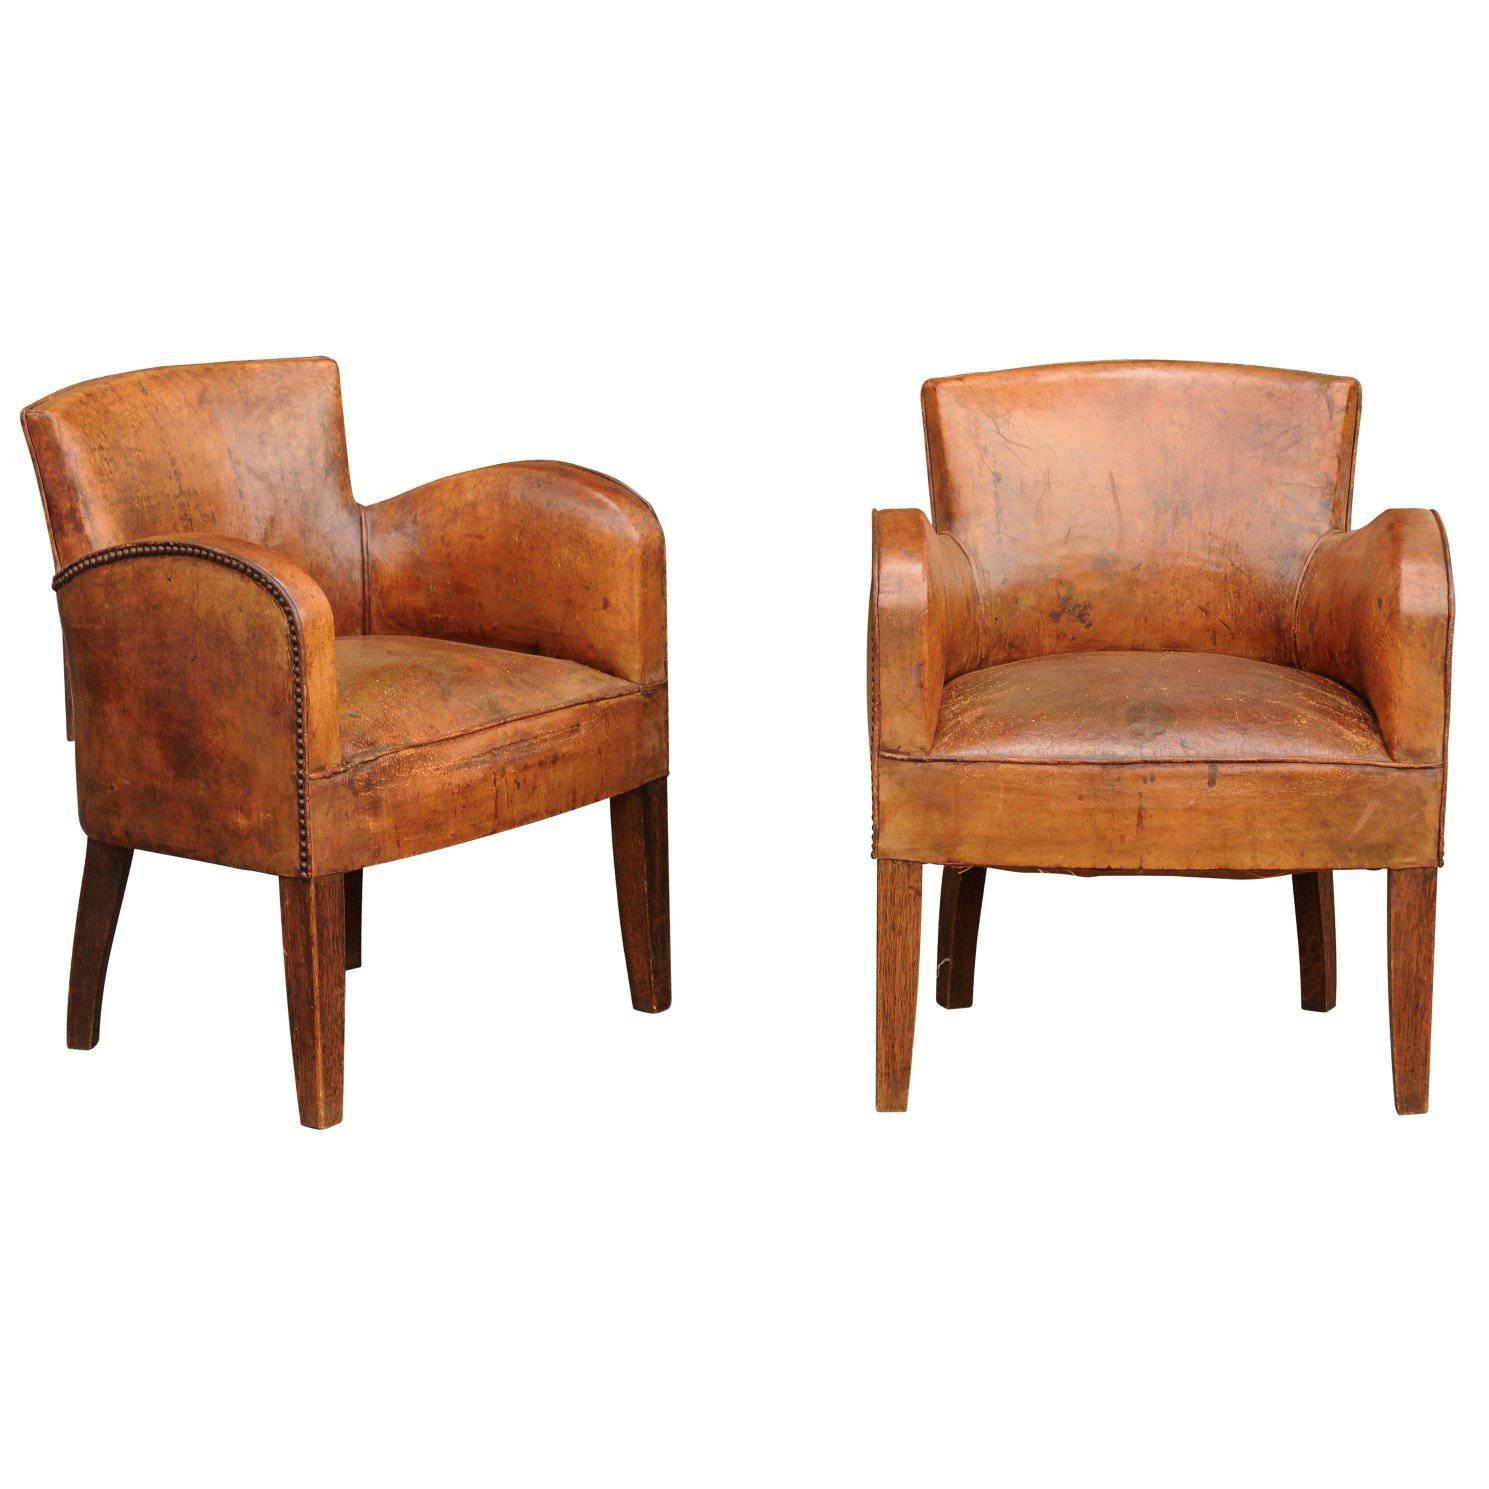 Pair of English Turn of the Century Leather Club Chairs with Nailhead Surround